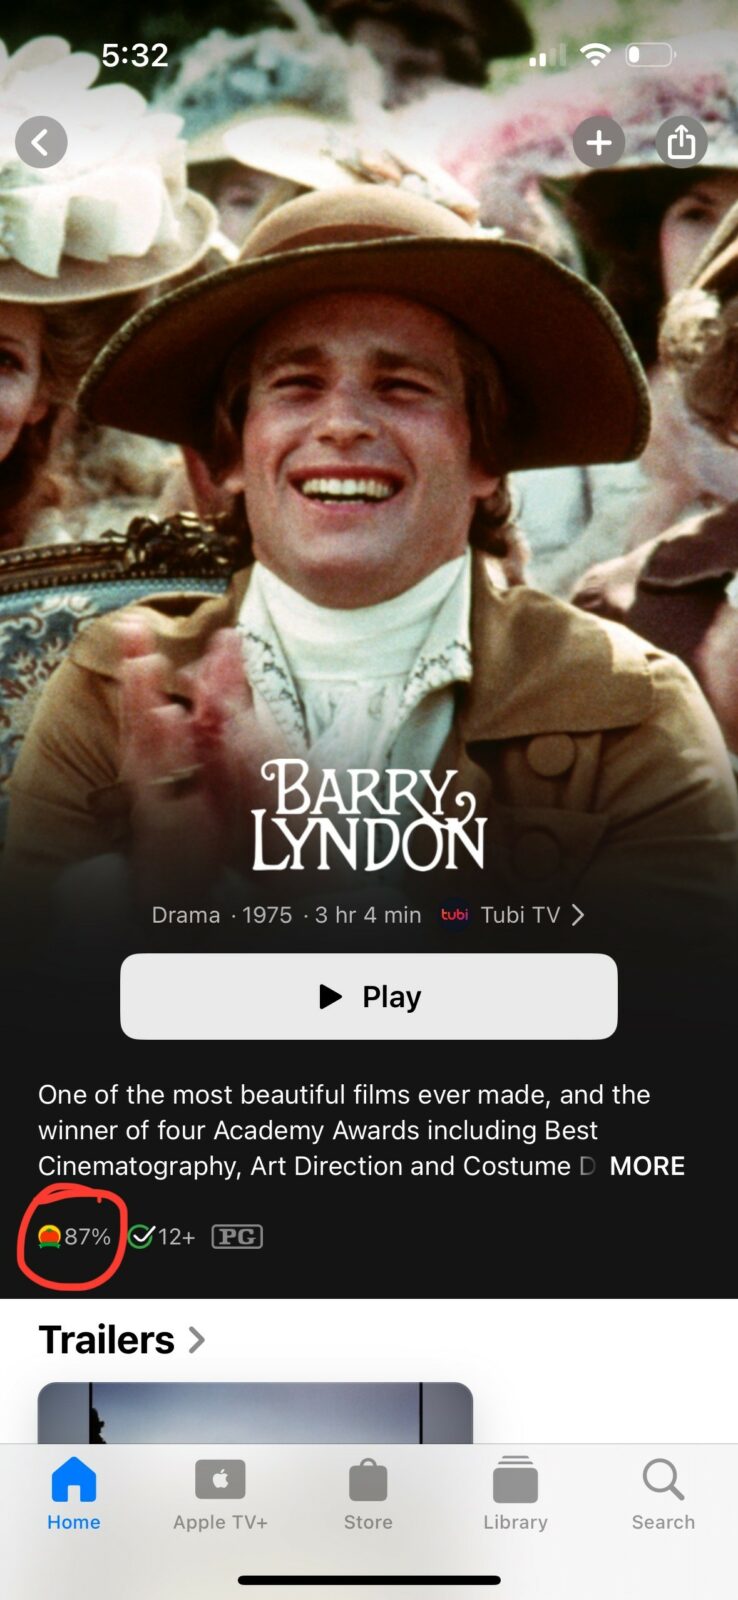 Screenshot of the page for the movie “Barry Lyndon” in the Apple TV app, with a circled Rotten Tomatoes score of 87%.